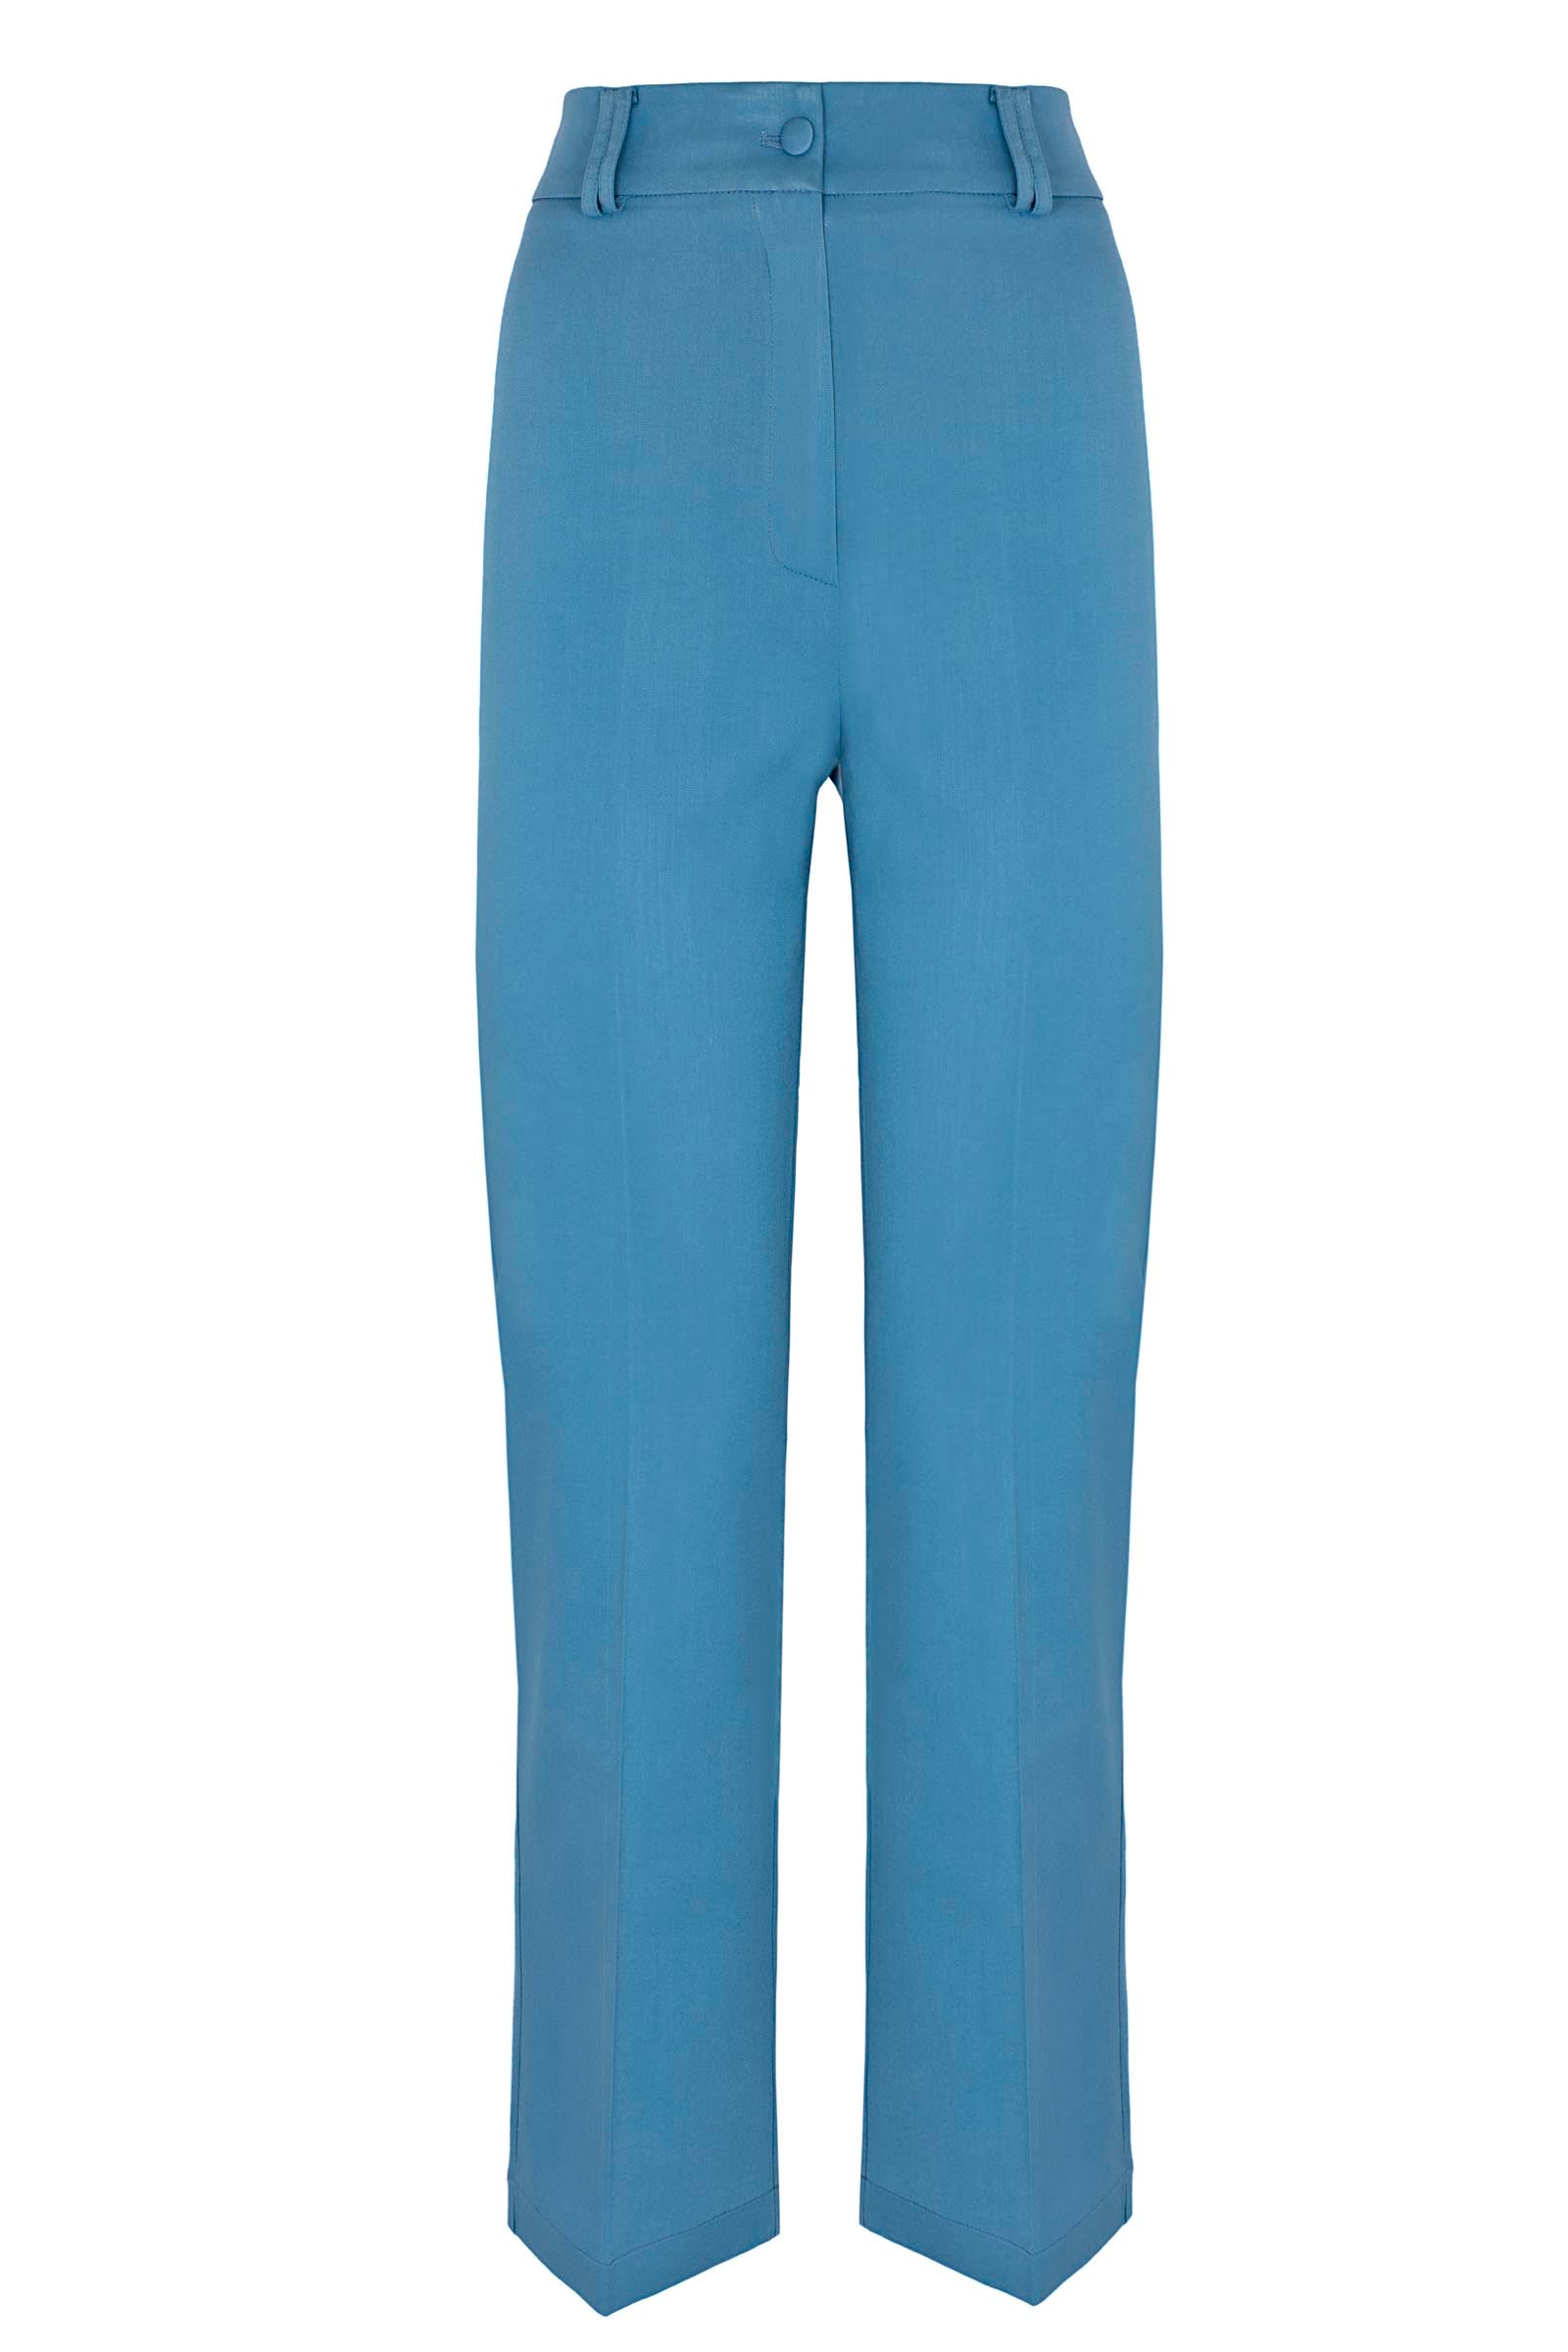 The Blue Canvas Smoking Pants